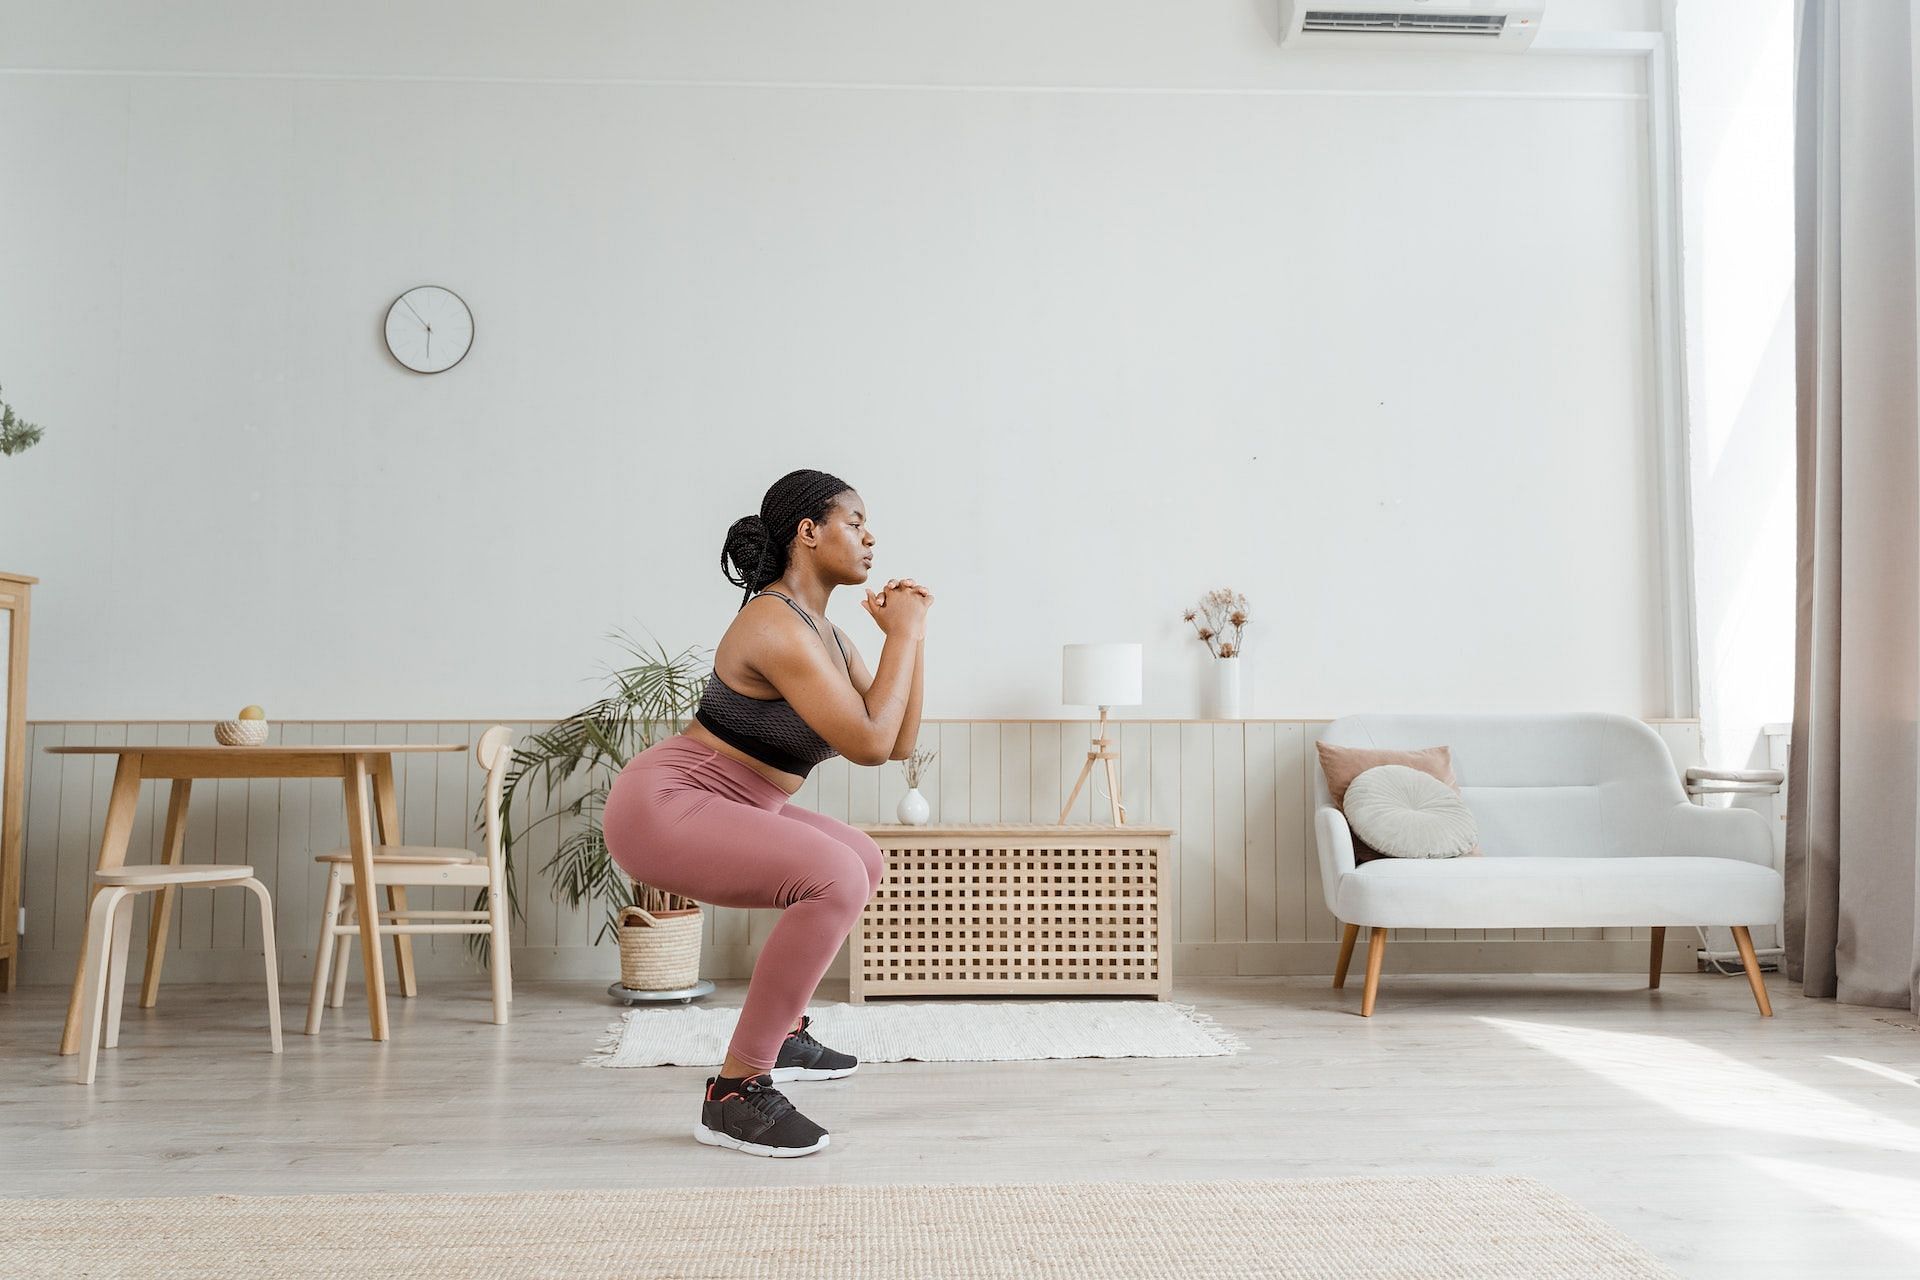 Bodyweights squats are a great exercise to add to your full-body workouts at home plan. (Photo via Pexels/MART PRODUCTION)